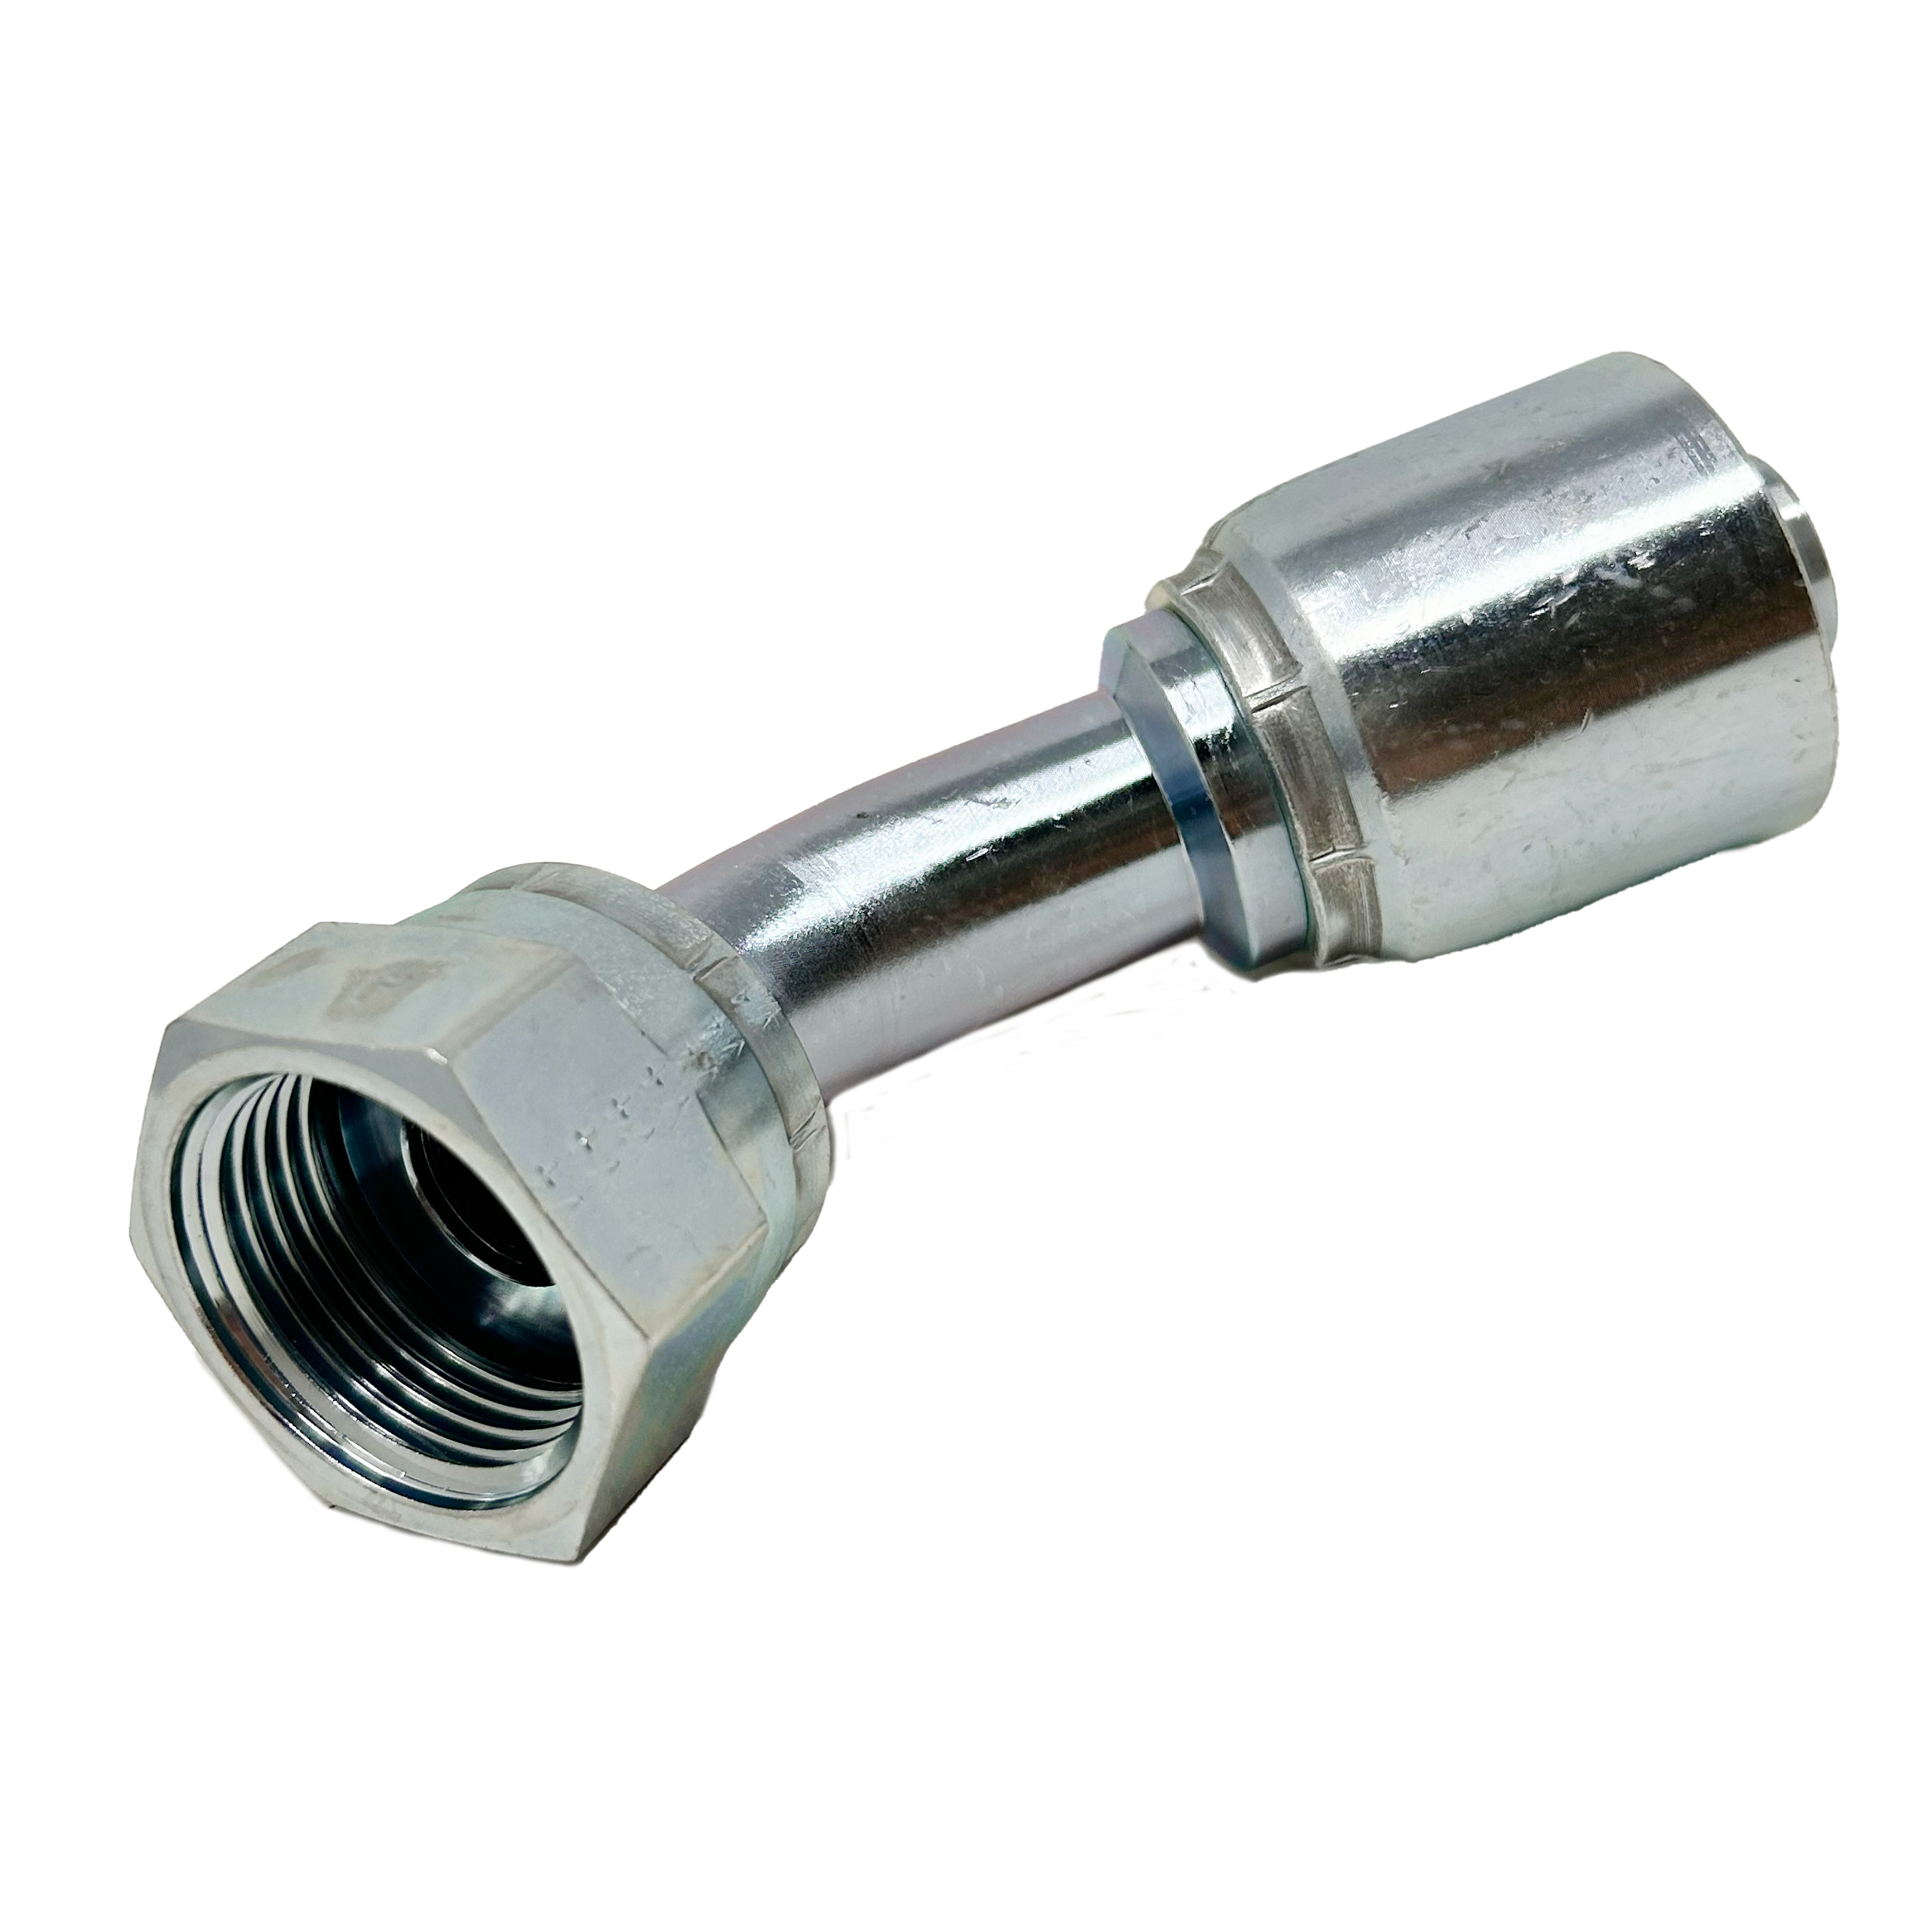 B2-OFFX45-1216: Continental Hose Fitting, 0.75 (3/4") Hose ID x 1-7/16-12 Female ORFS, 45-Degree Swivel Connection